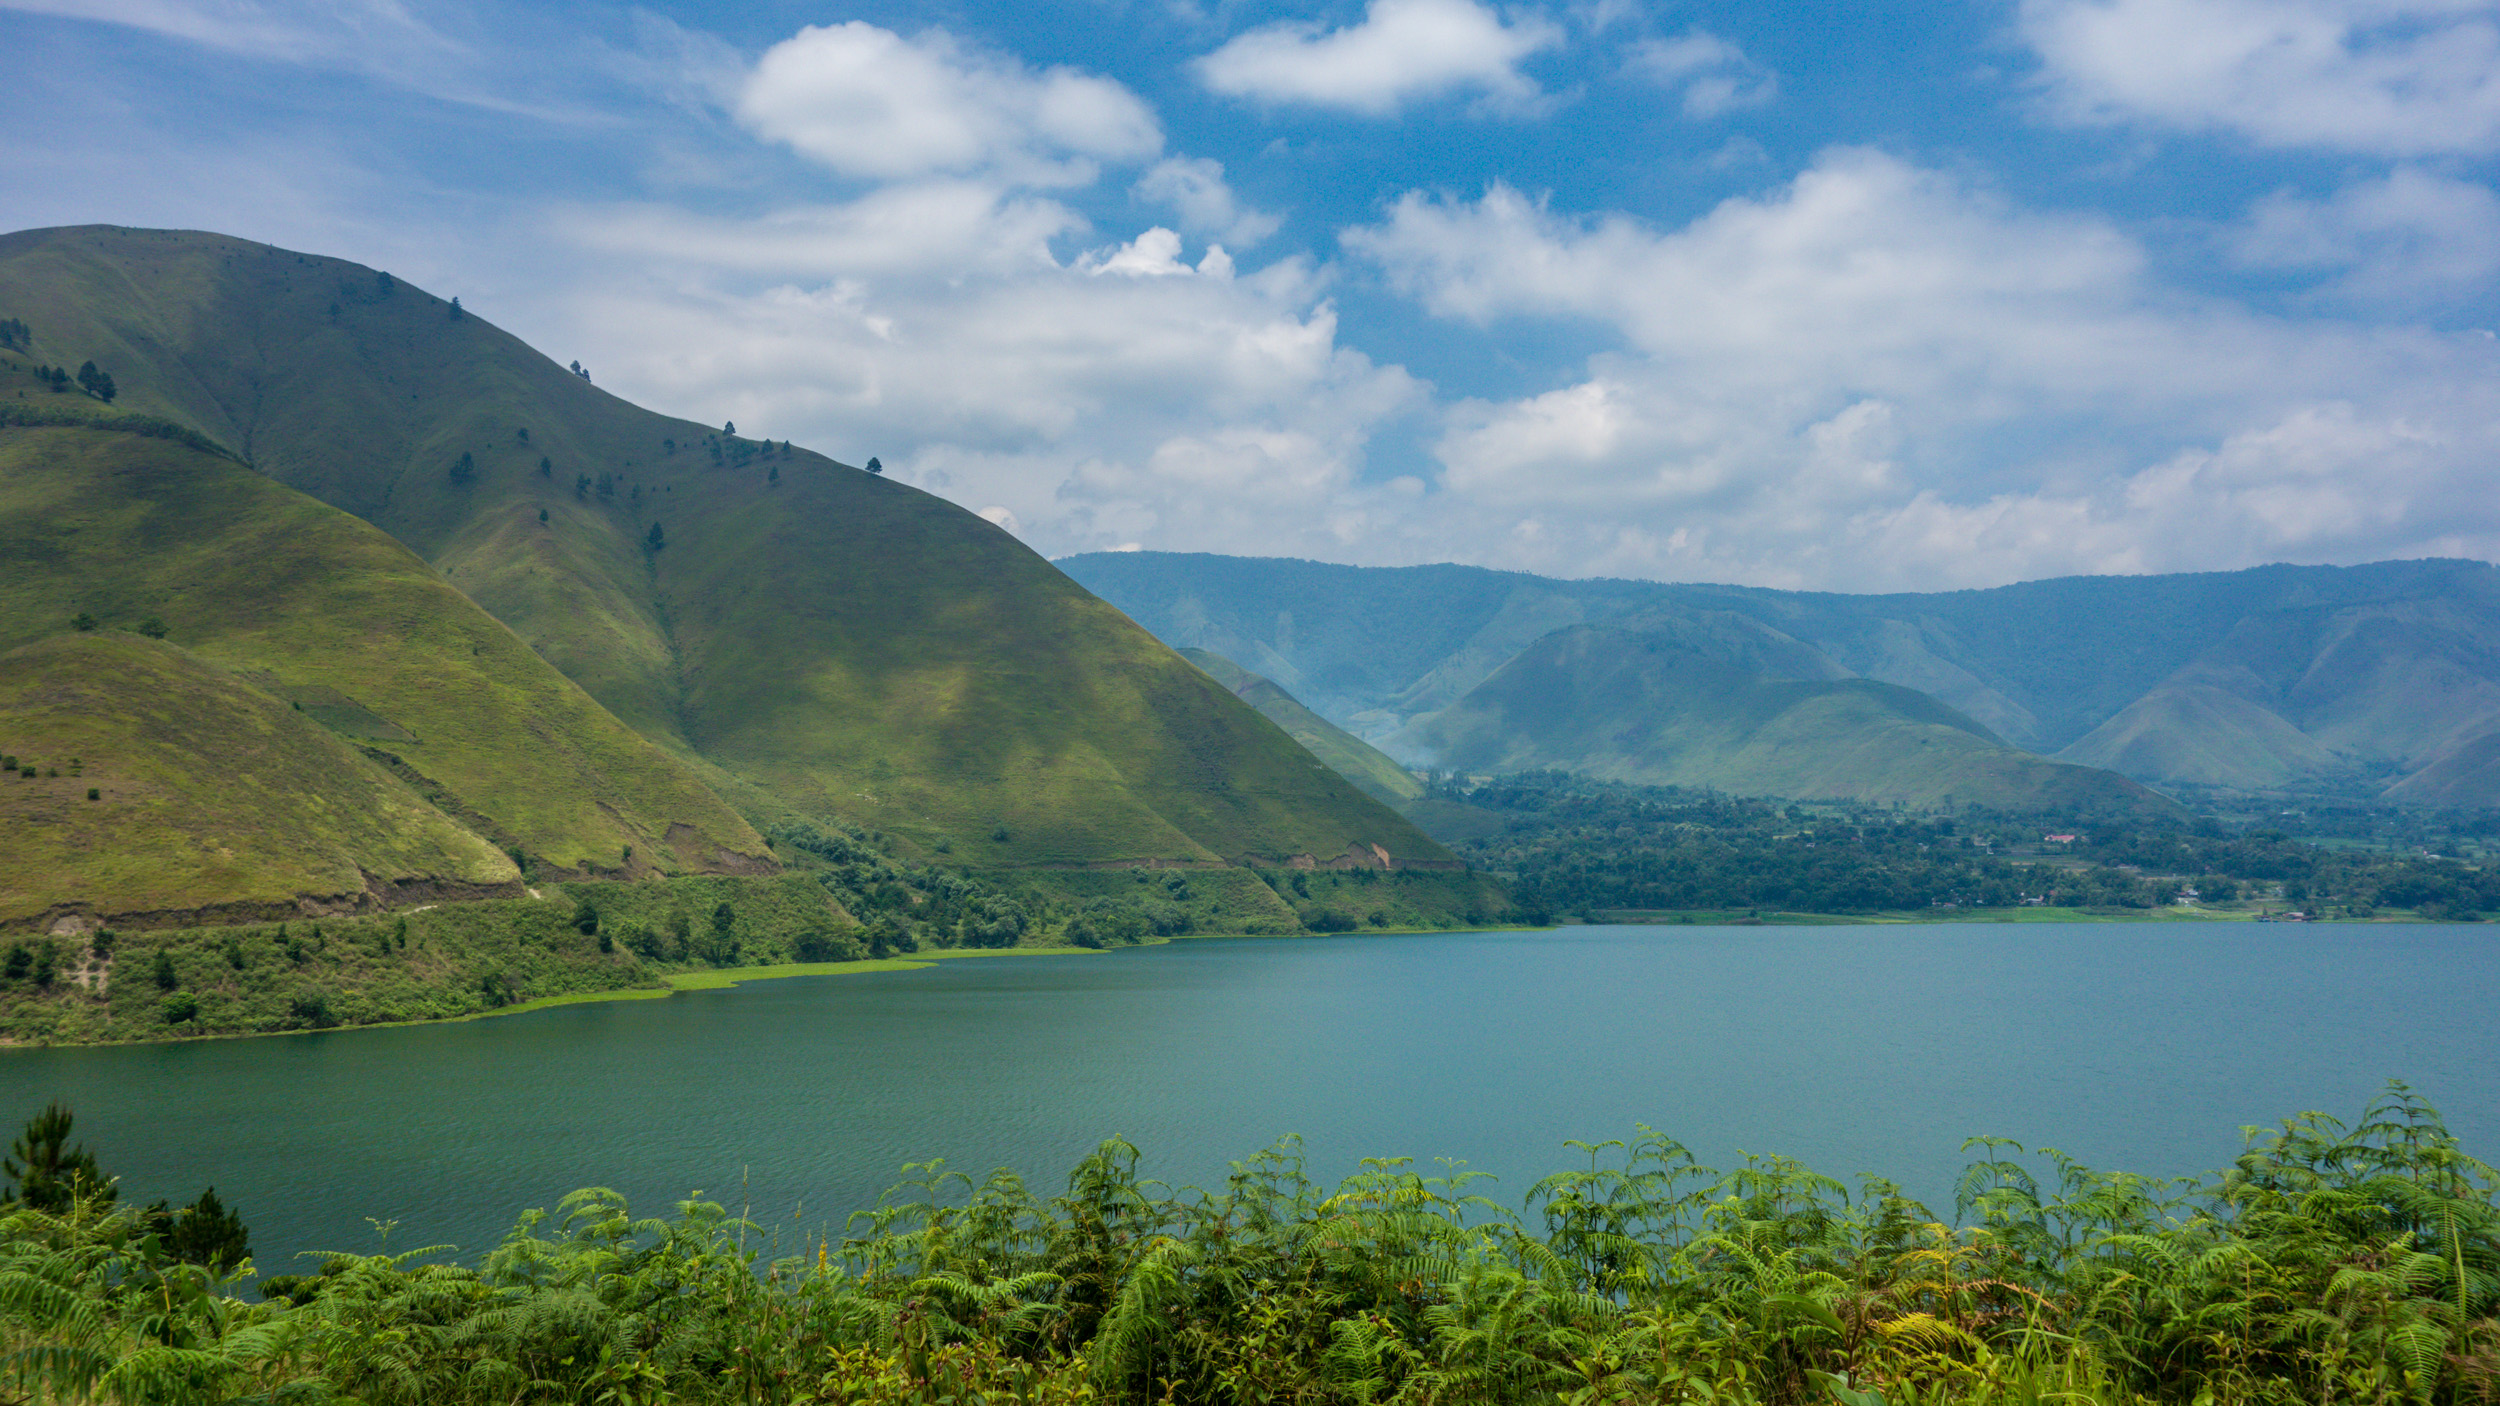 Tired of Work? Let's Plan Your Vacation to Lake Toba